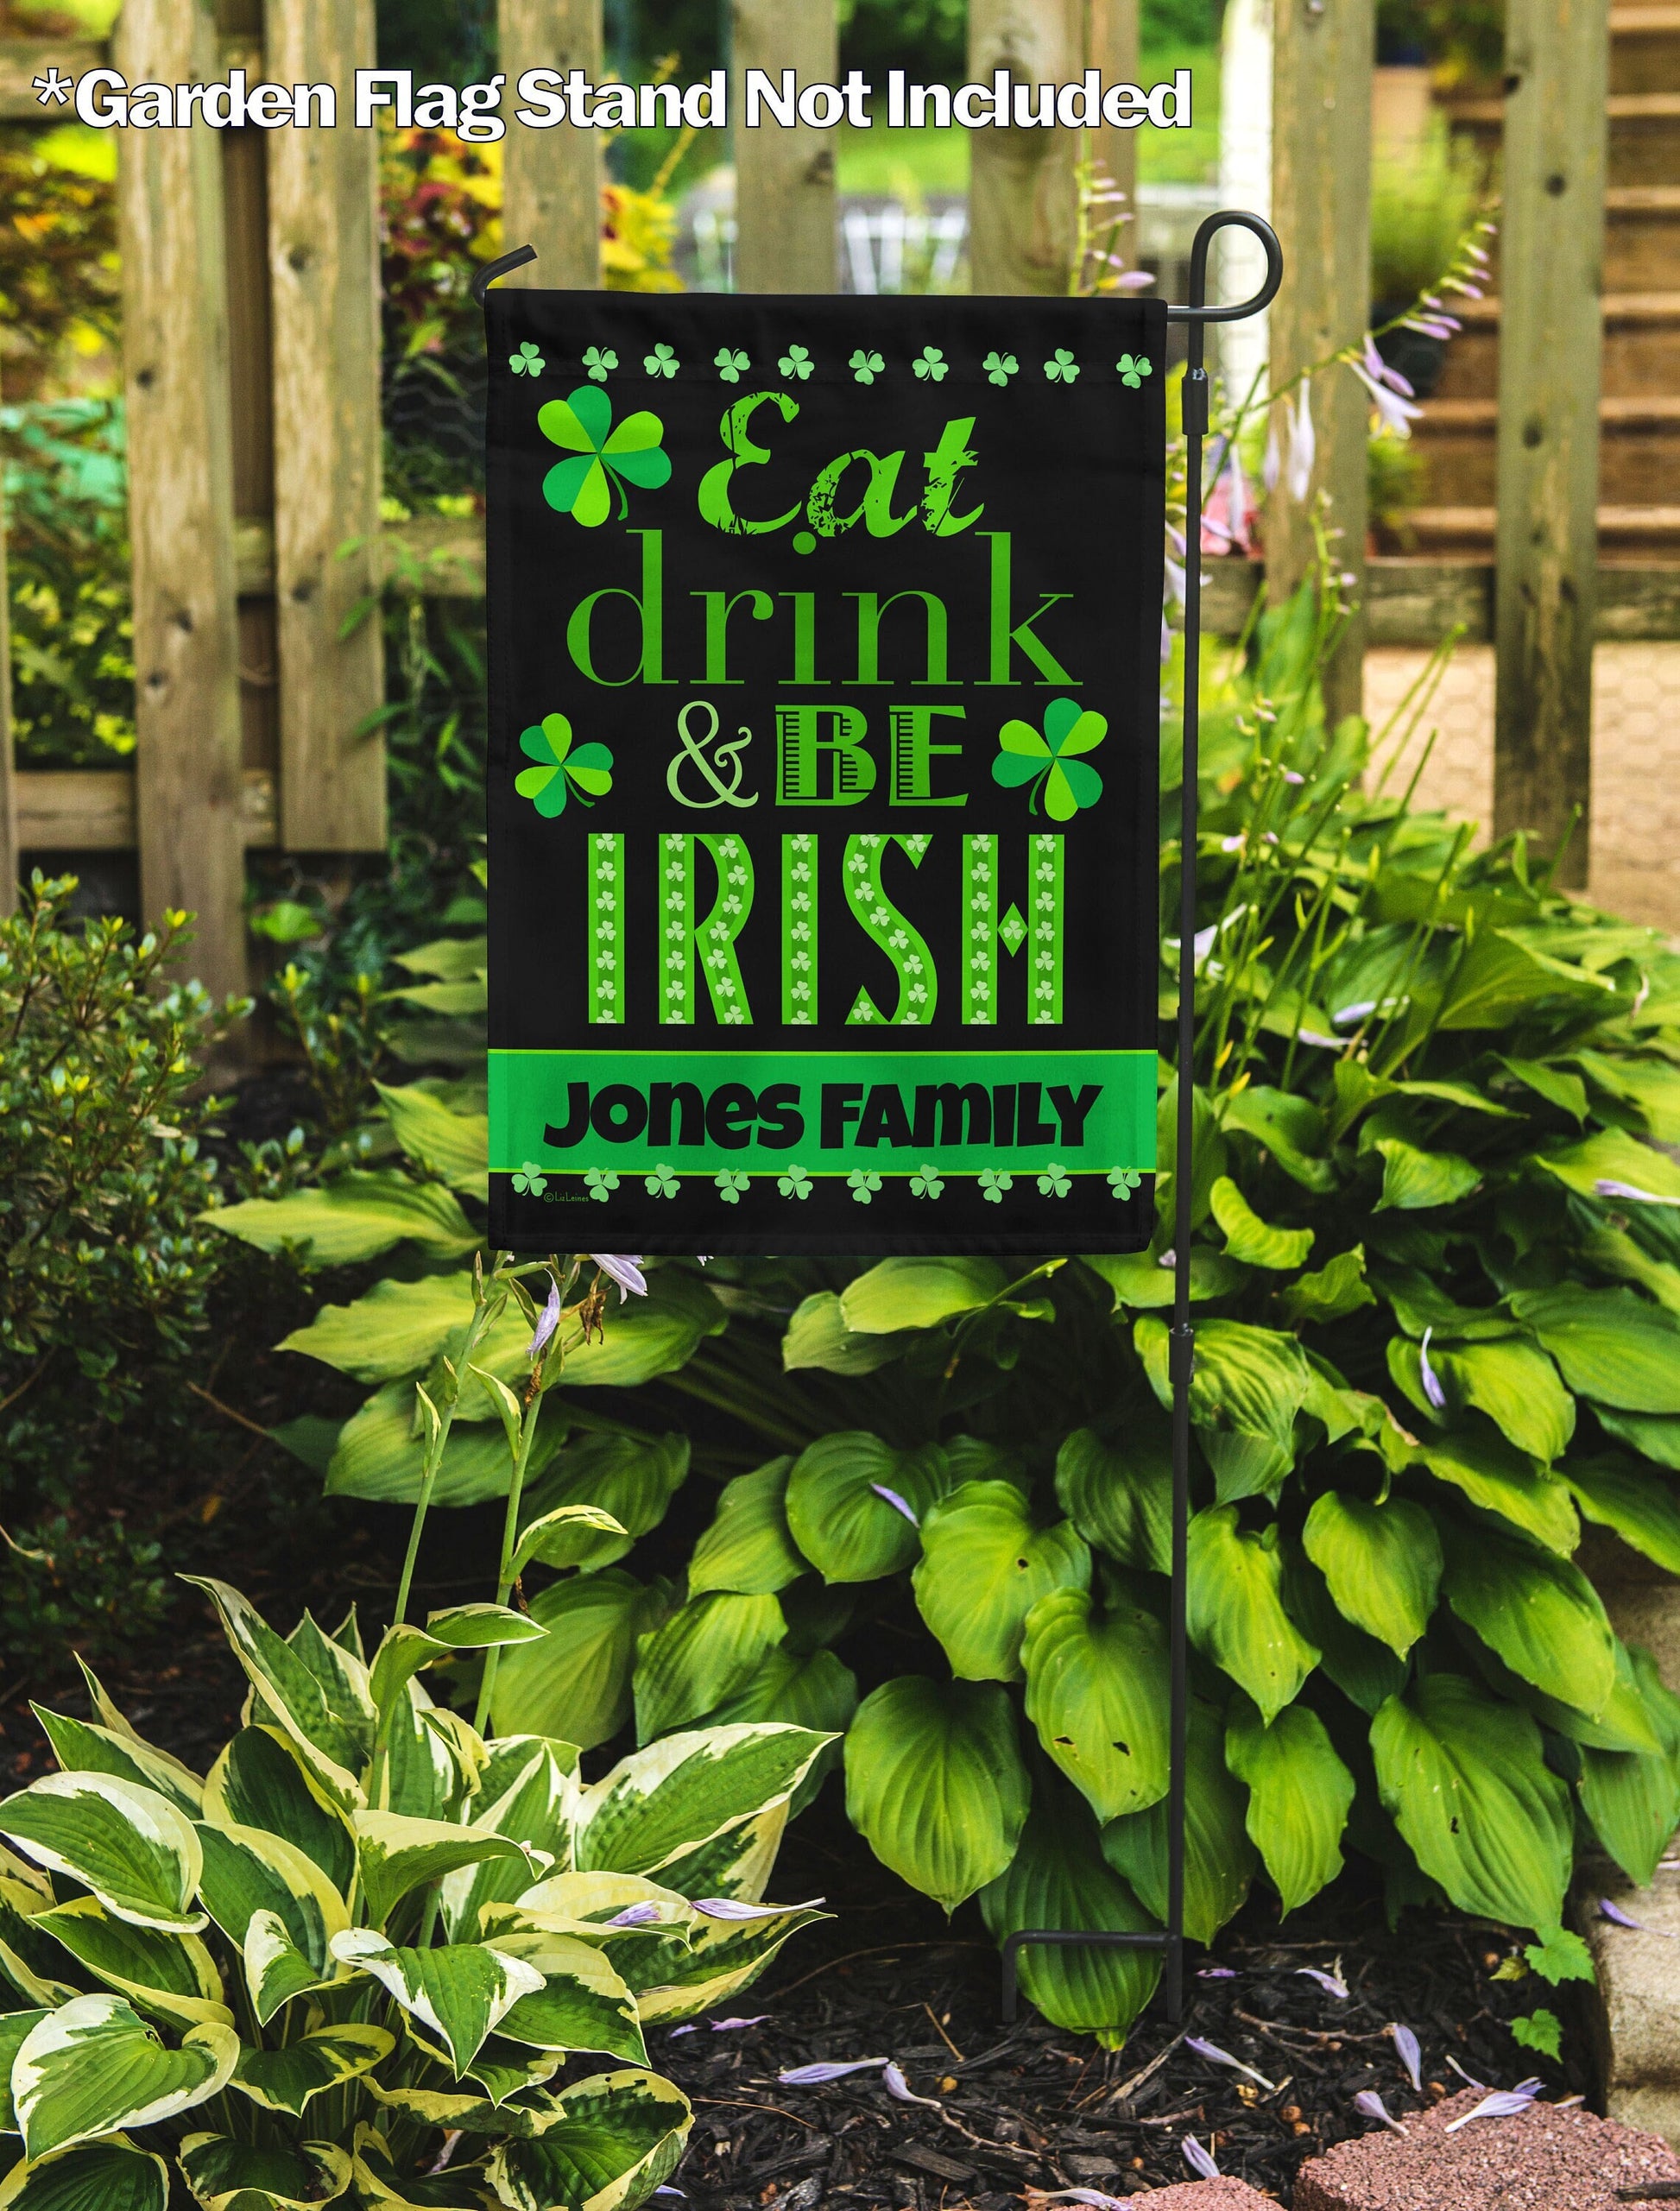 St. Patrick's Day Eat Drink And Be Irish Personalized House Flag - St. Patrick's Day Garden Flag - St. Patrick's Day Decorative Flags